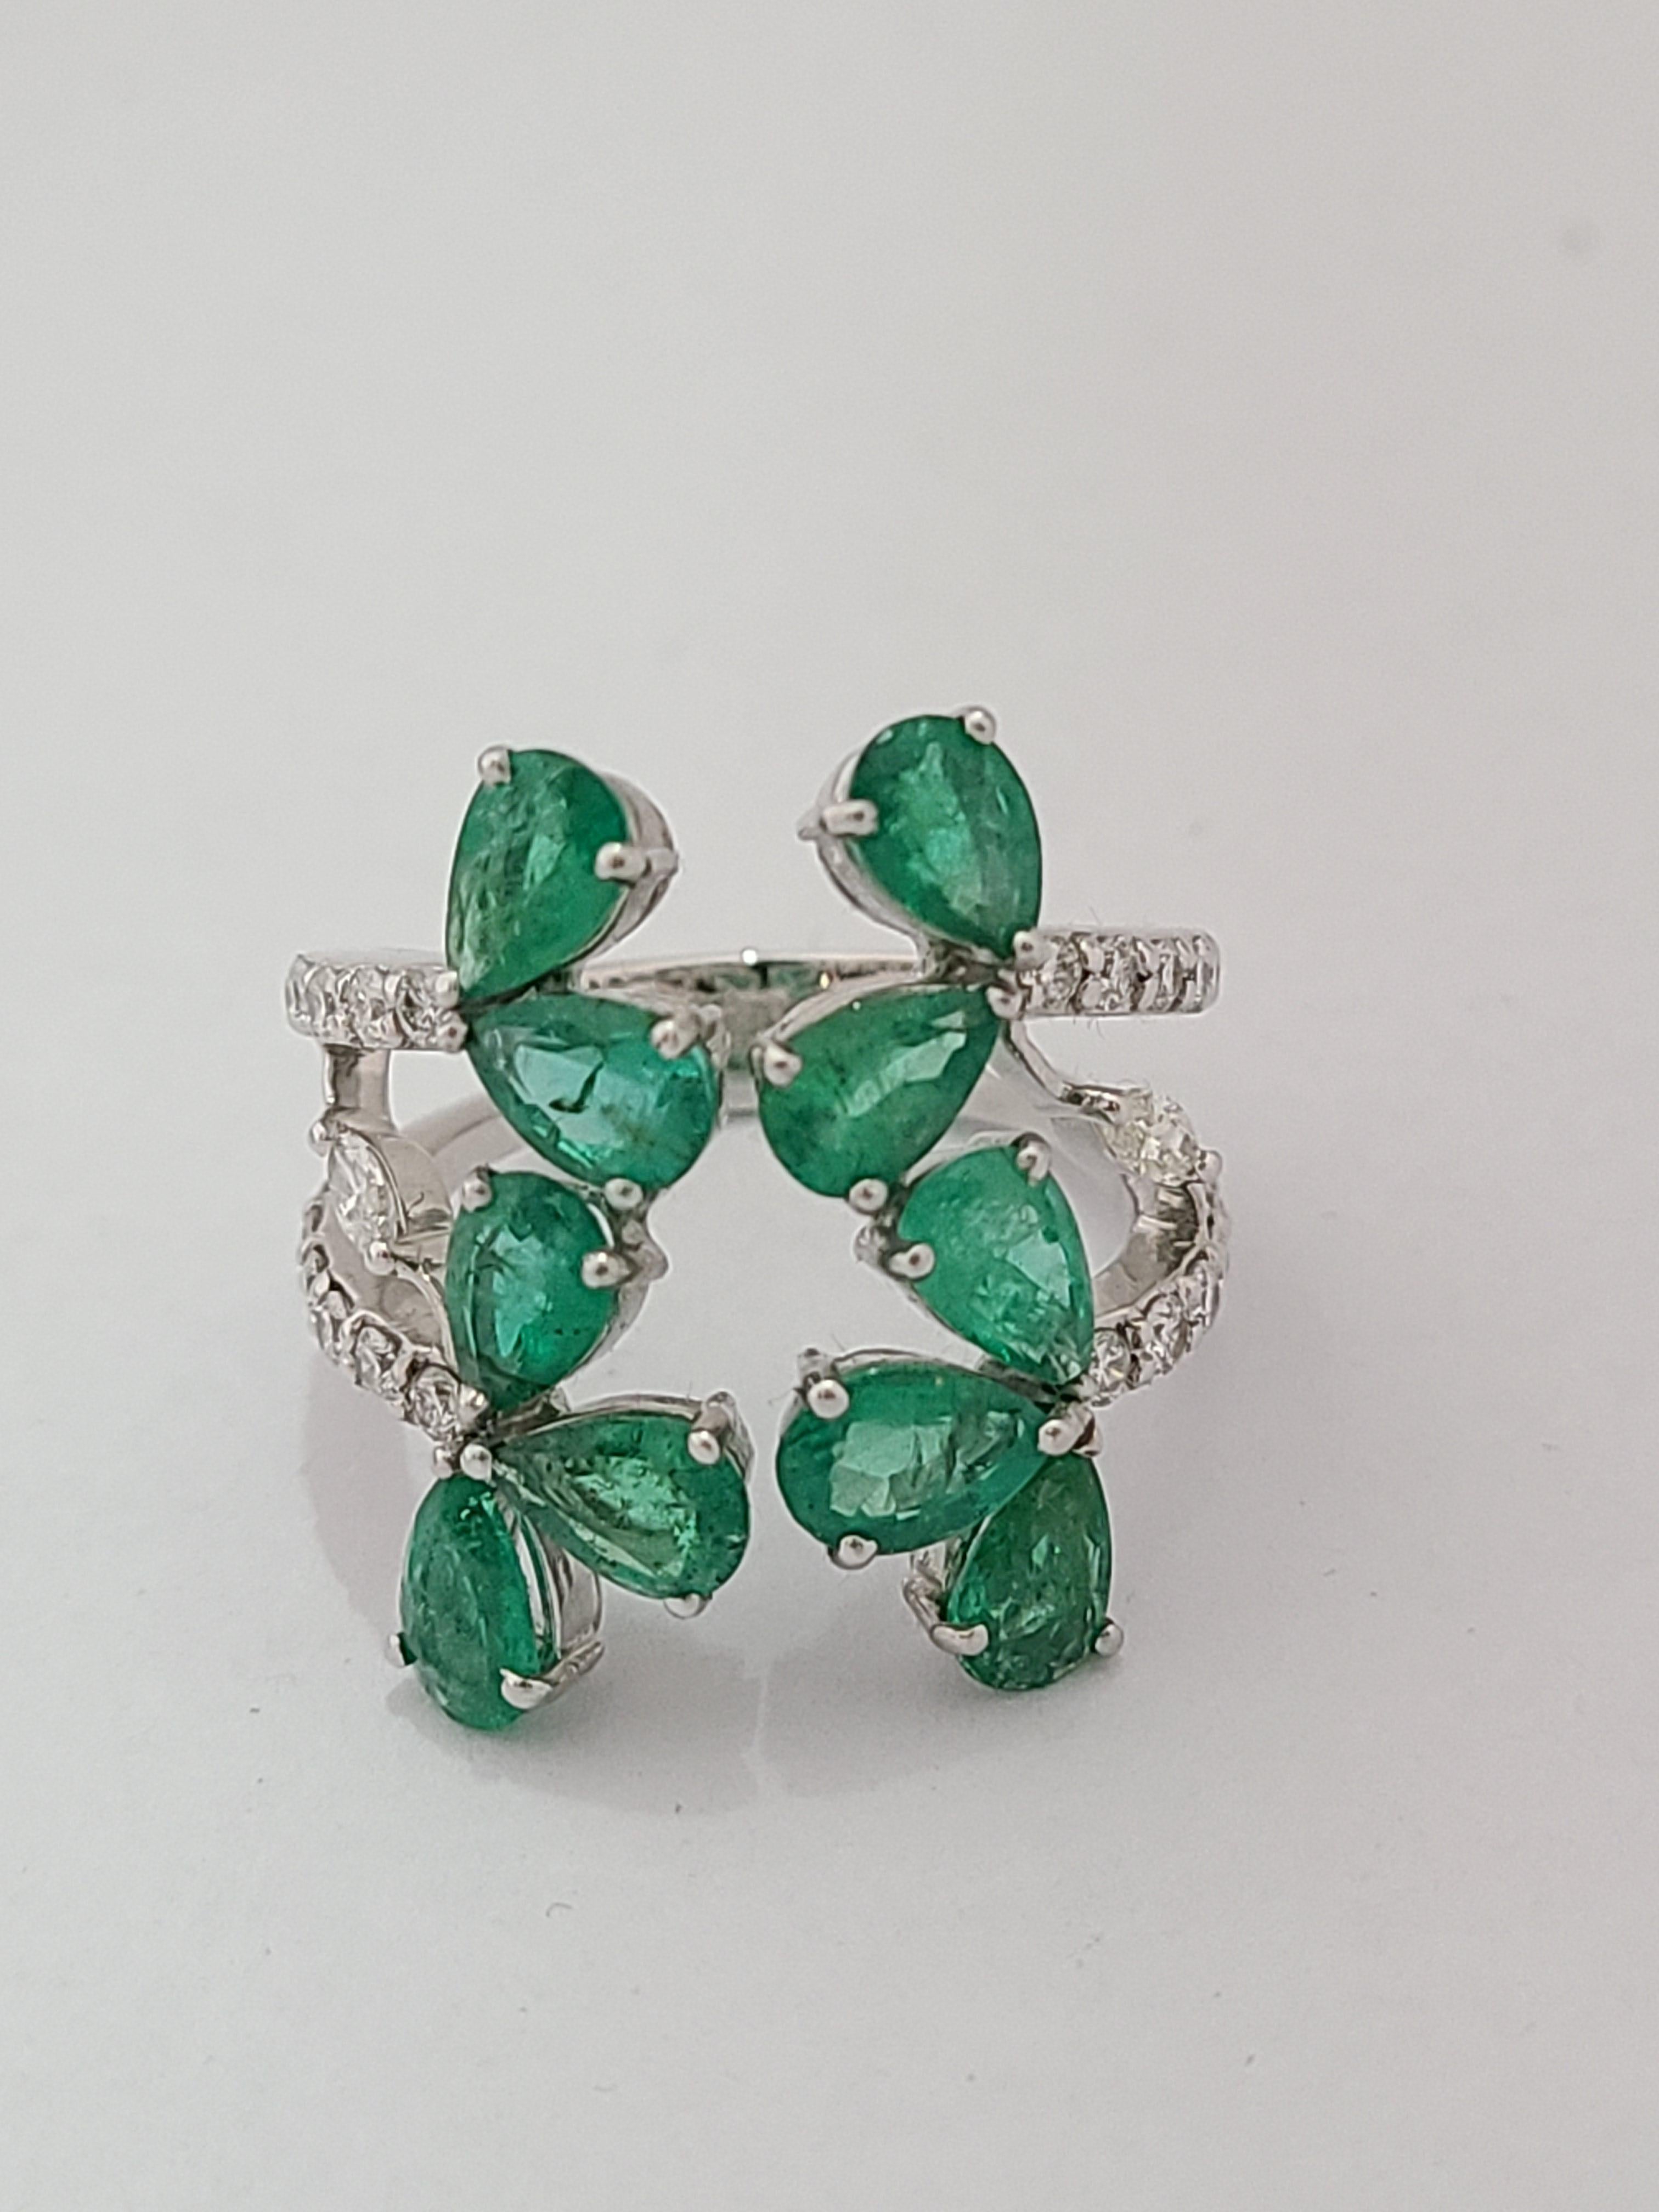 A chic and modern emerald and diamond ring set in 18k white gold. The natural emerald weight is 3.40 carats and natural diamond combined weight is .58 carats. The Ring dimensions in cm 2.10 x 1.40 x 2.20 (LXWXH). Ring size US 6.